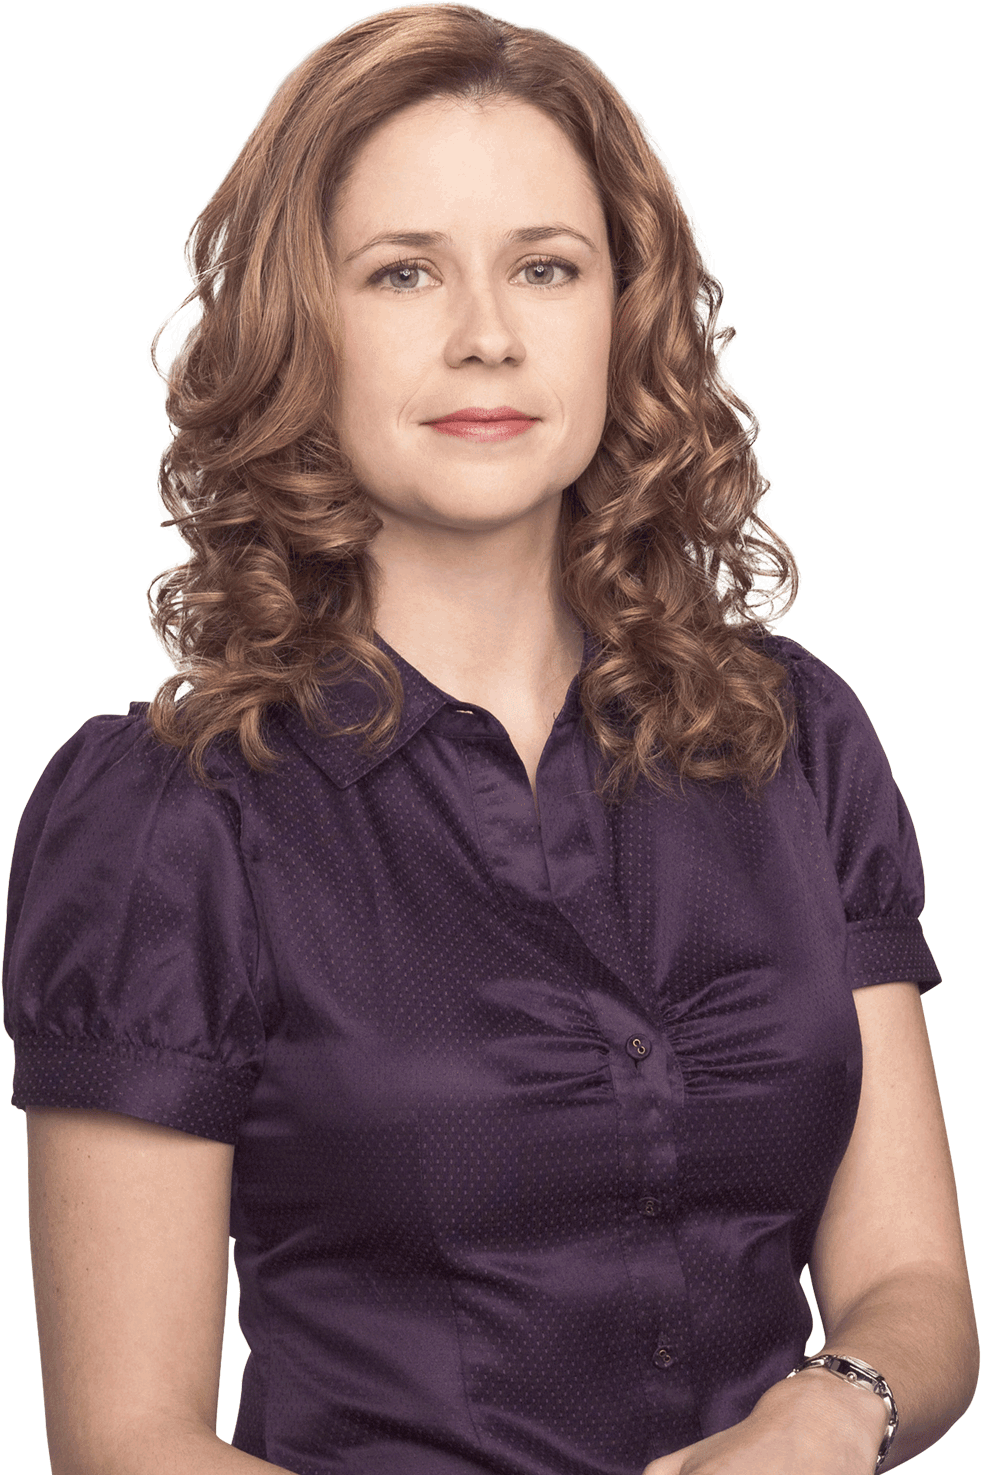 Download Pam Beesly Pam Beesly - Pam Halpert Curly Hair PNG Image with No.....